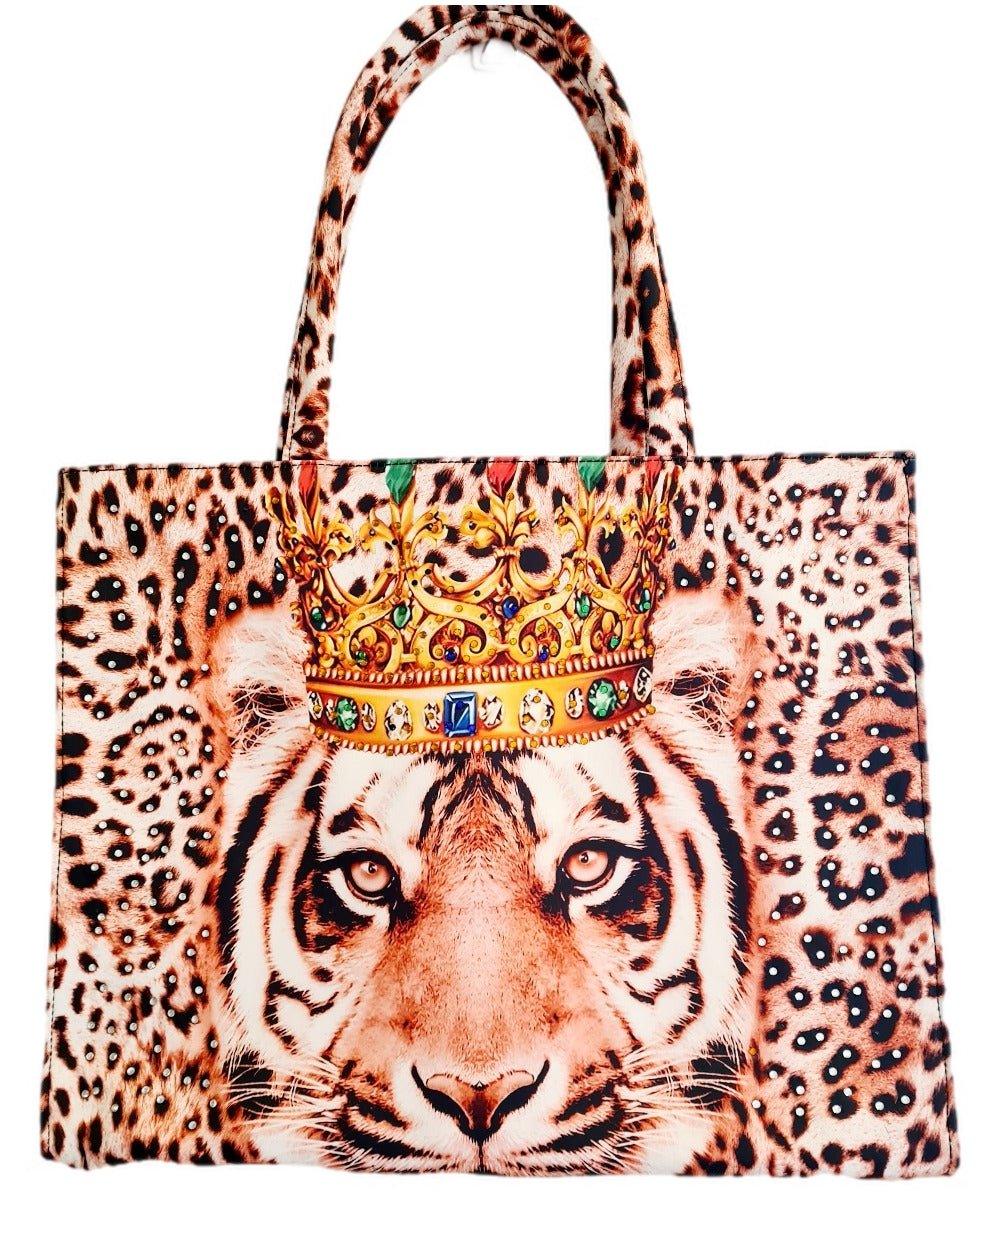 Snow Queen Natural Embellished Tote Bag-by Kaftans that Bling - Kaftans that Bling